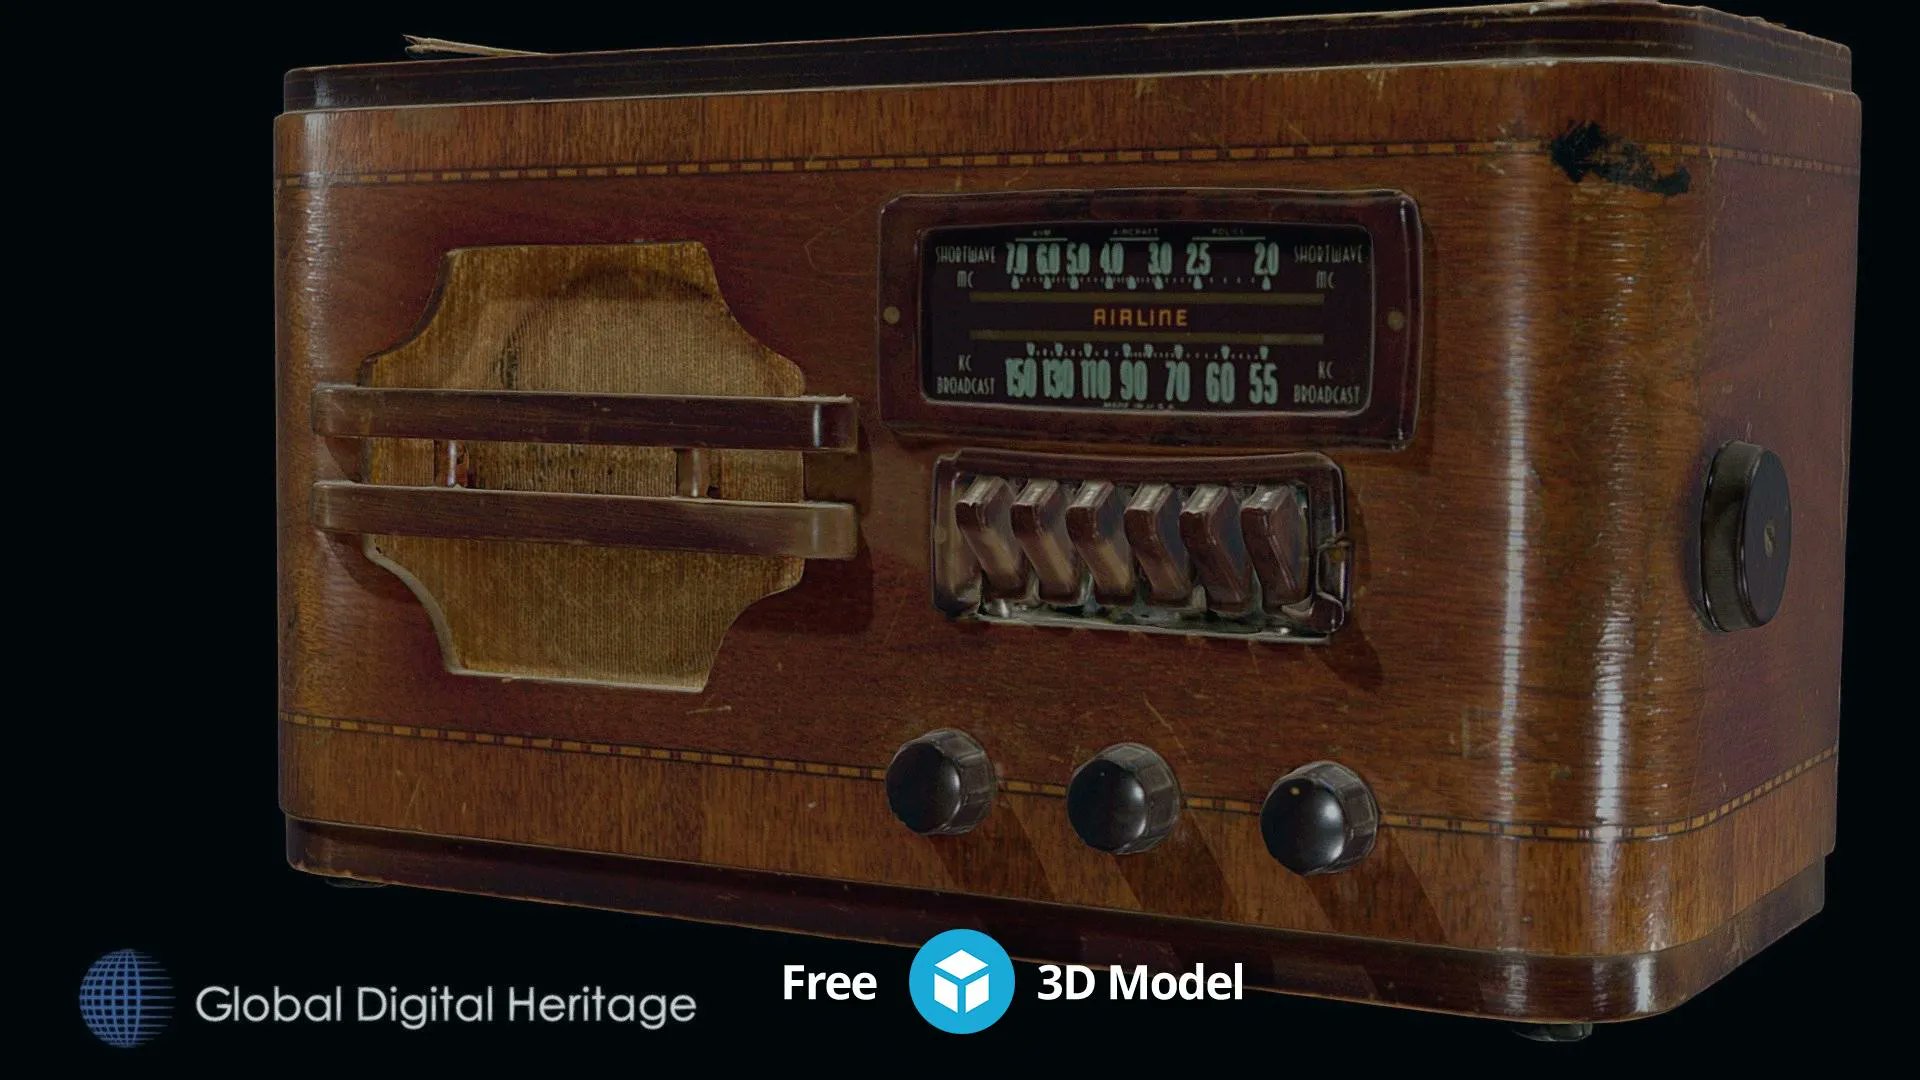 Sketchfab on Twitter: "Free #creativecommons 3D model download: 'Vintage  Montgomery Ward & Co. Airline Radio' by GlobalDigitalHeritage 👉  https://t.co/TfGwg2pgFT #3D https://t.co/SX2JH7o94J" / Twitter